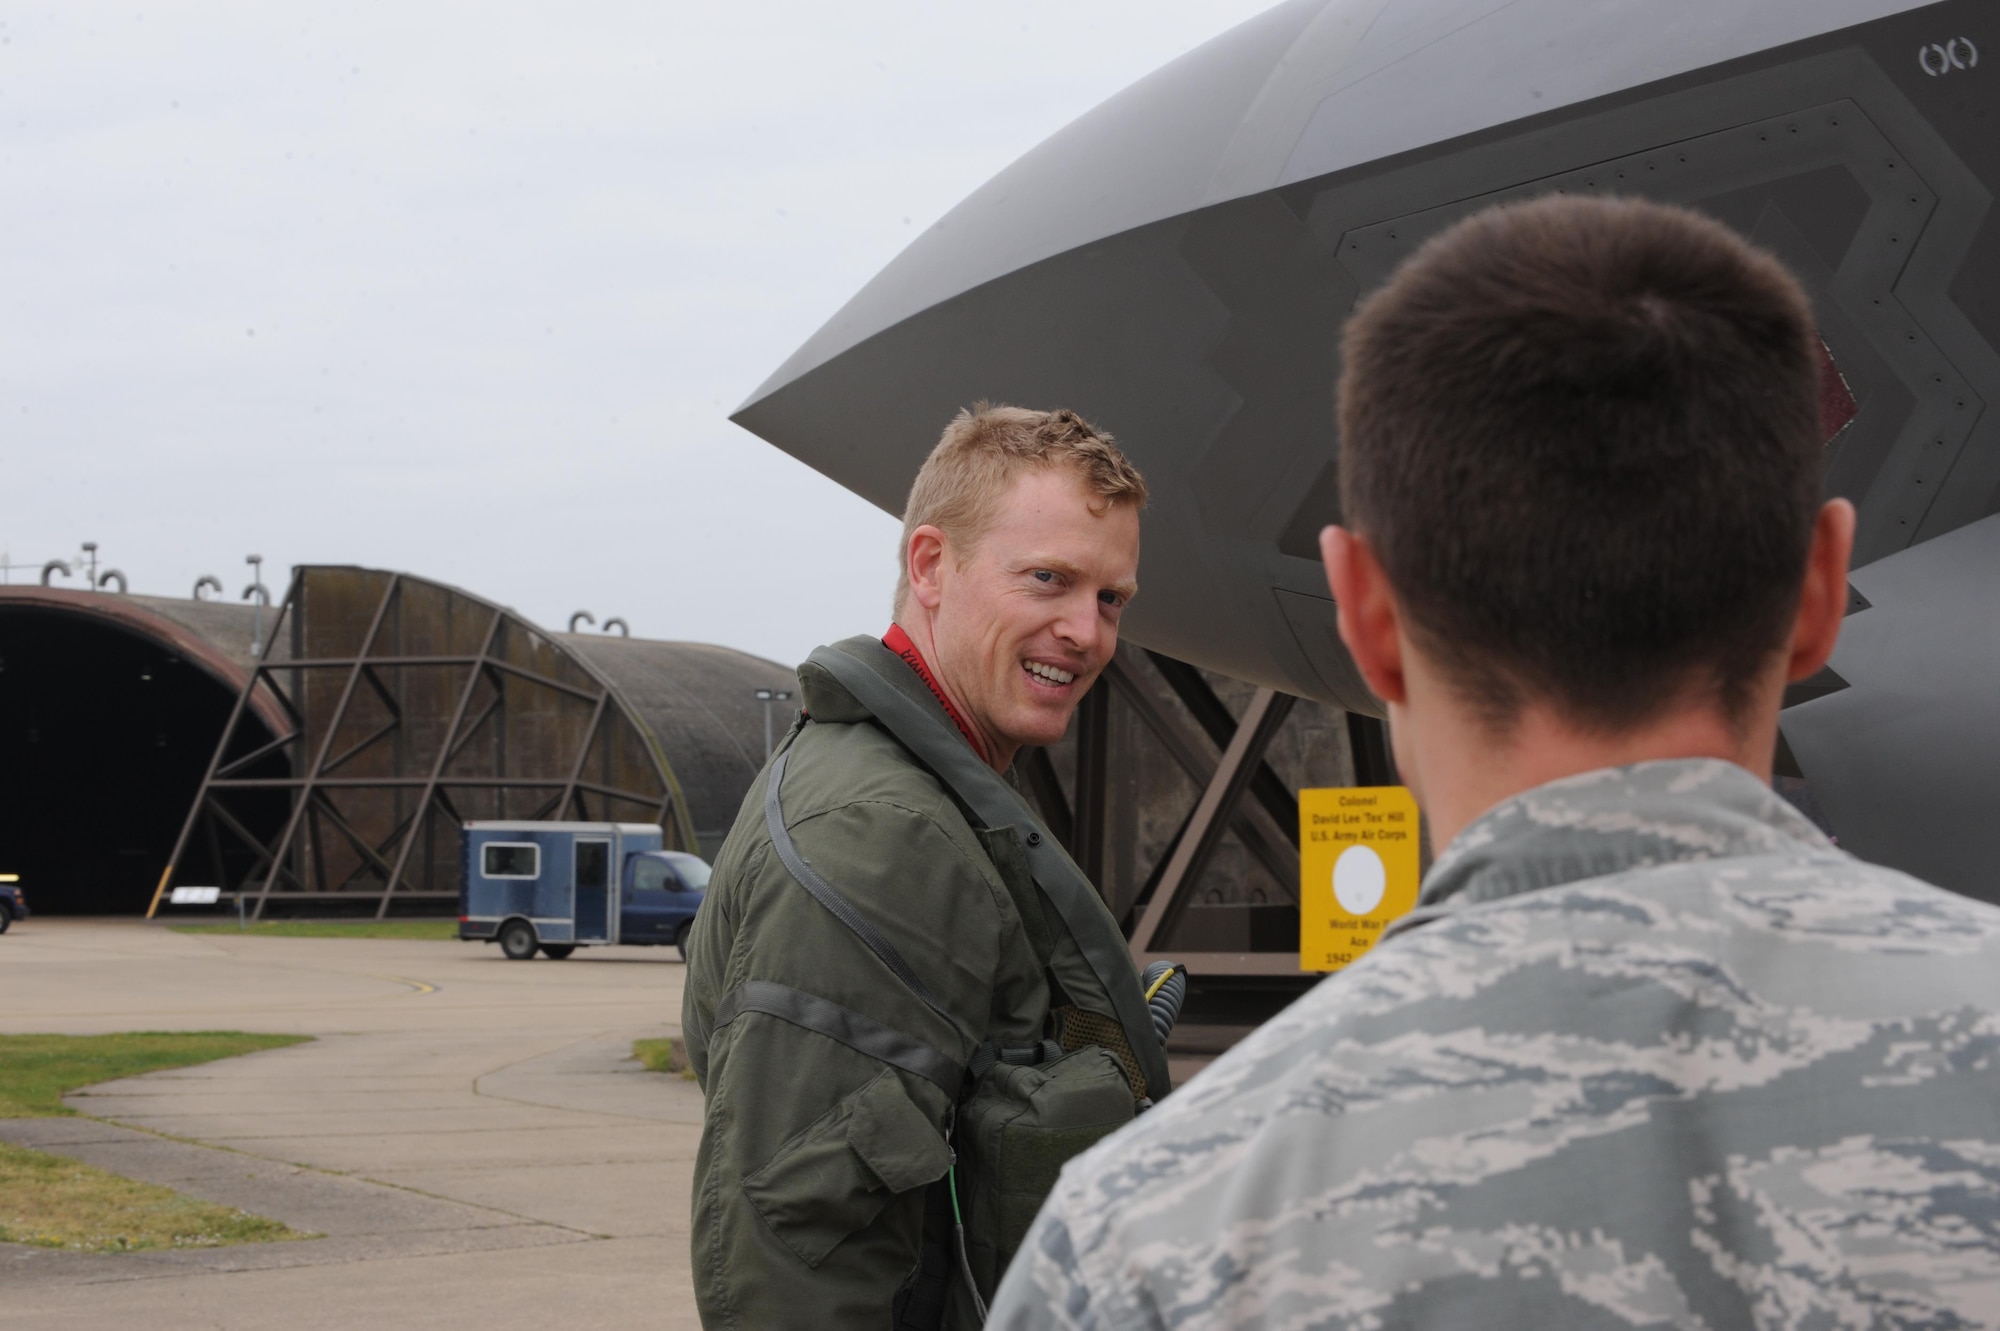 Maj. Luke Harris, an F-35A pilot from the 34th Fighter Squadron talks to 34th Aircraft Maintenance Unit crew chief Staff Sgt. Zachary Kasperek prior to flying a training mission at RAF Lakenheath. Airmen from the 388th and 419th Fighter Wings at Hill Air Force Base, Utah, deployed the F-35A overseas for the first time. While in Europe, they will train with units from the U.S. Air Force, Royal Air Force and air forces from other NATO allies. (U.S. Air Force photo/Micah Garbarino)